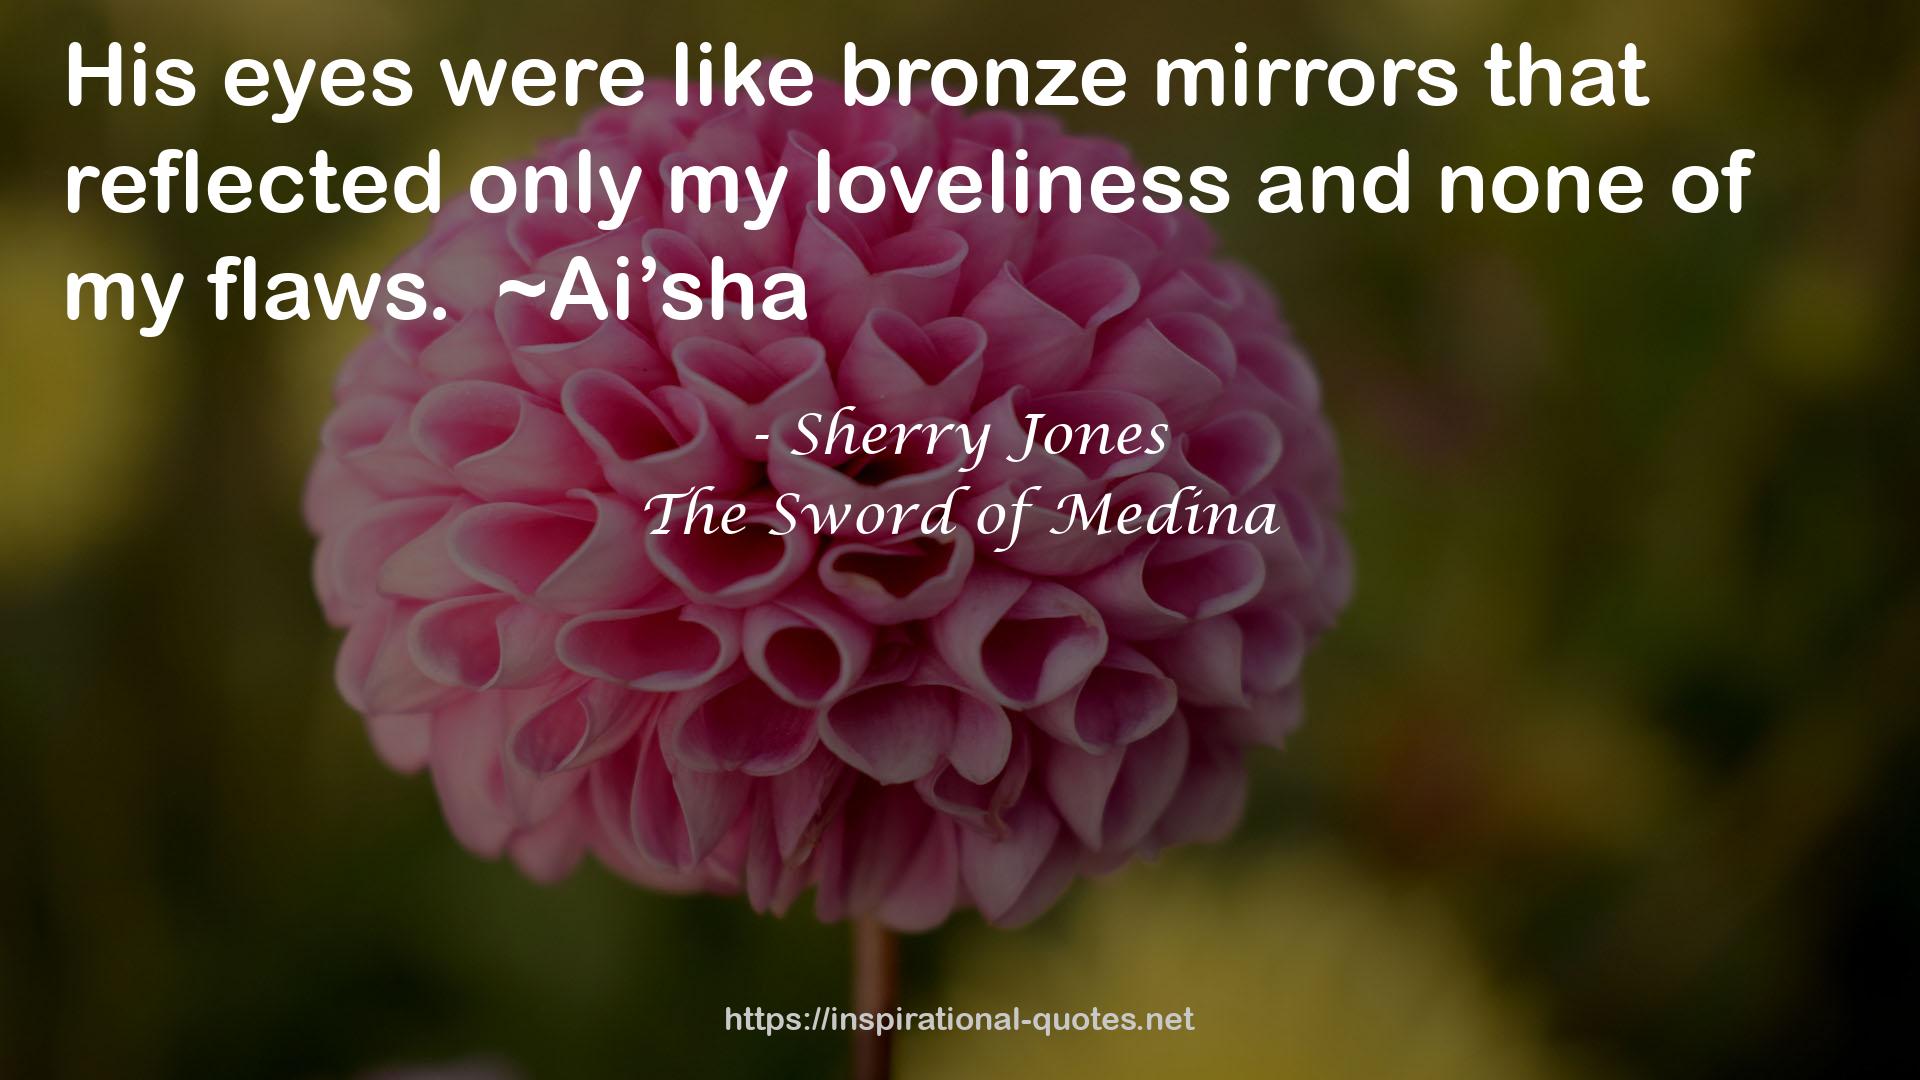 The Sword of Medina QUOTES